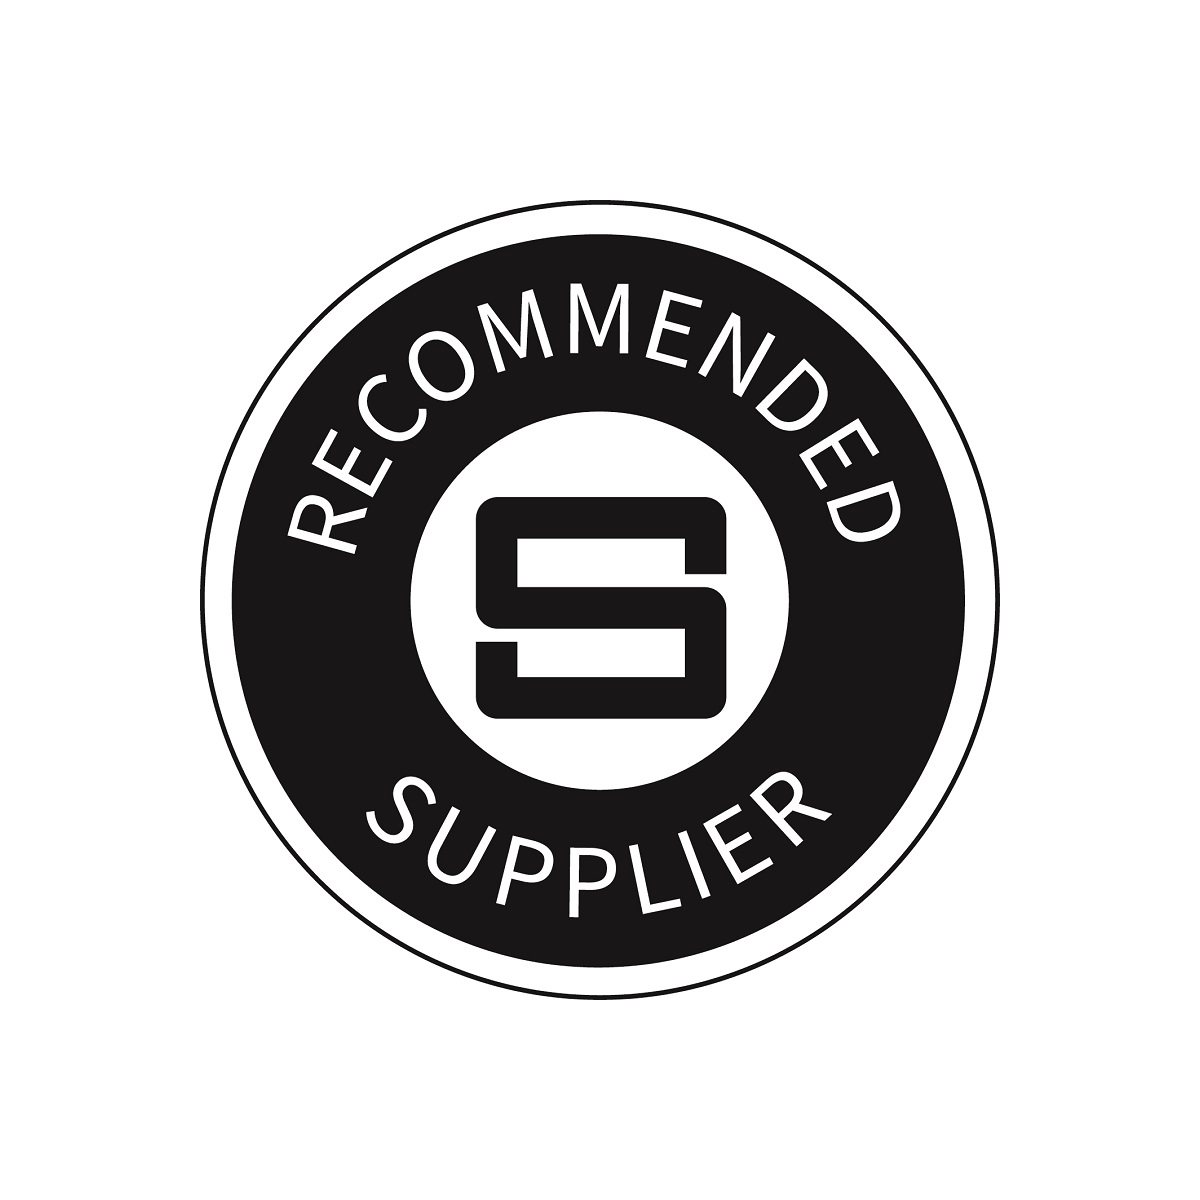 our recommended supplier badge. A black roundal with the letter s in the middle with the words recommended supplier around the outside